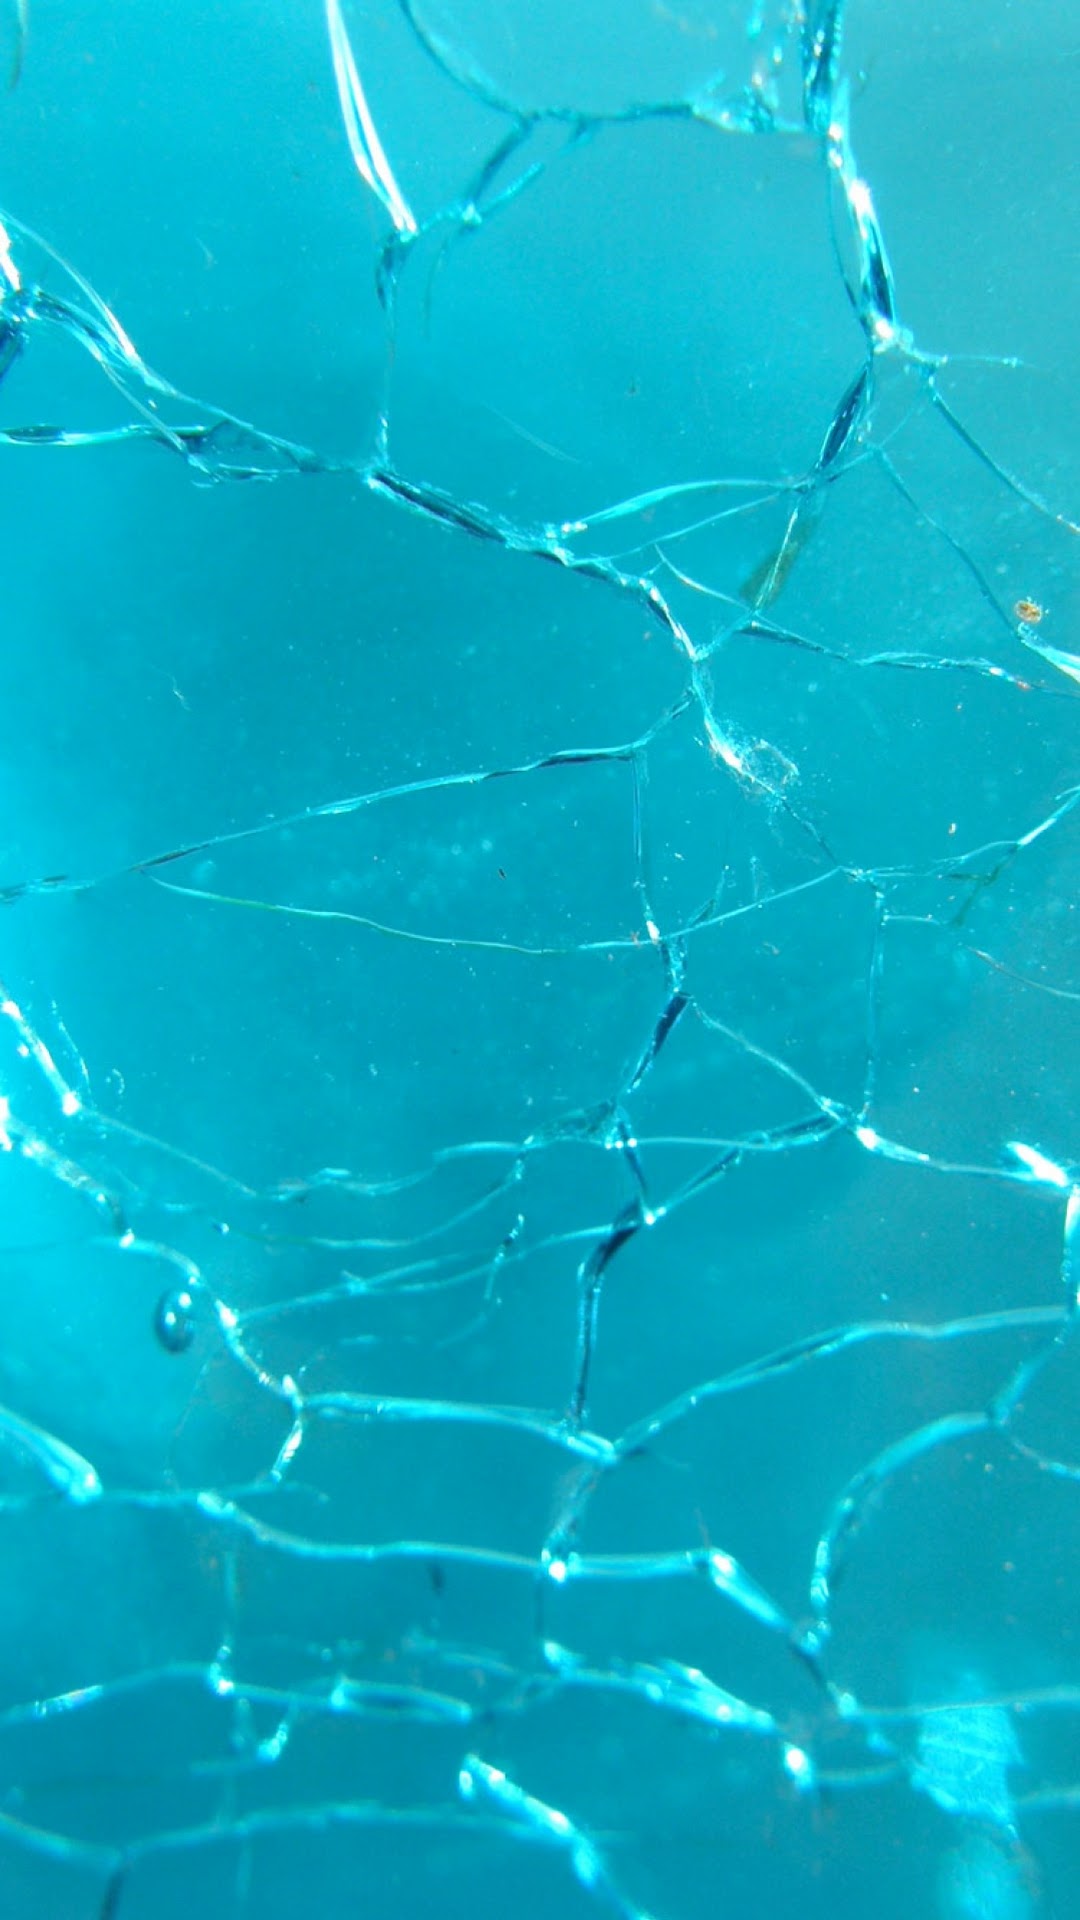 Hd Cracked Screen Wallpaper For Android - Home Screen Android Wallpaper  Gallery - 1080x1920 Wallpaper 